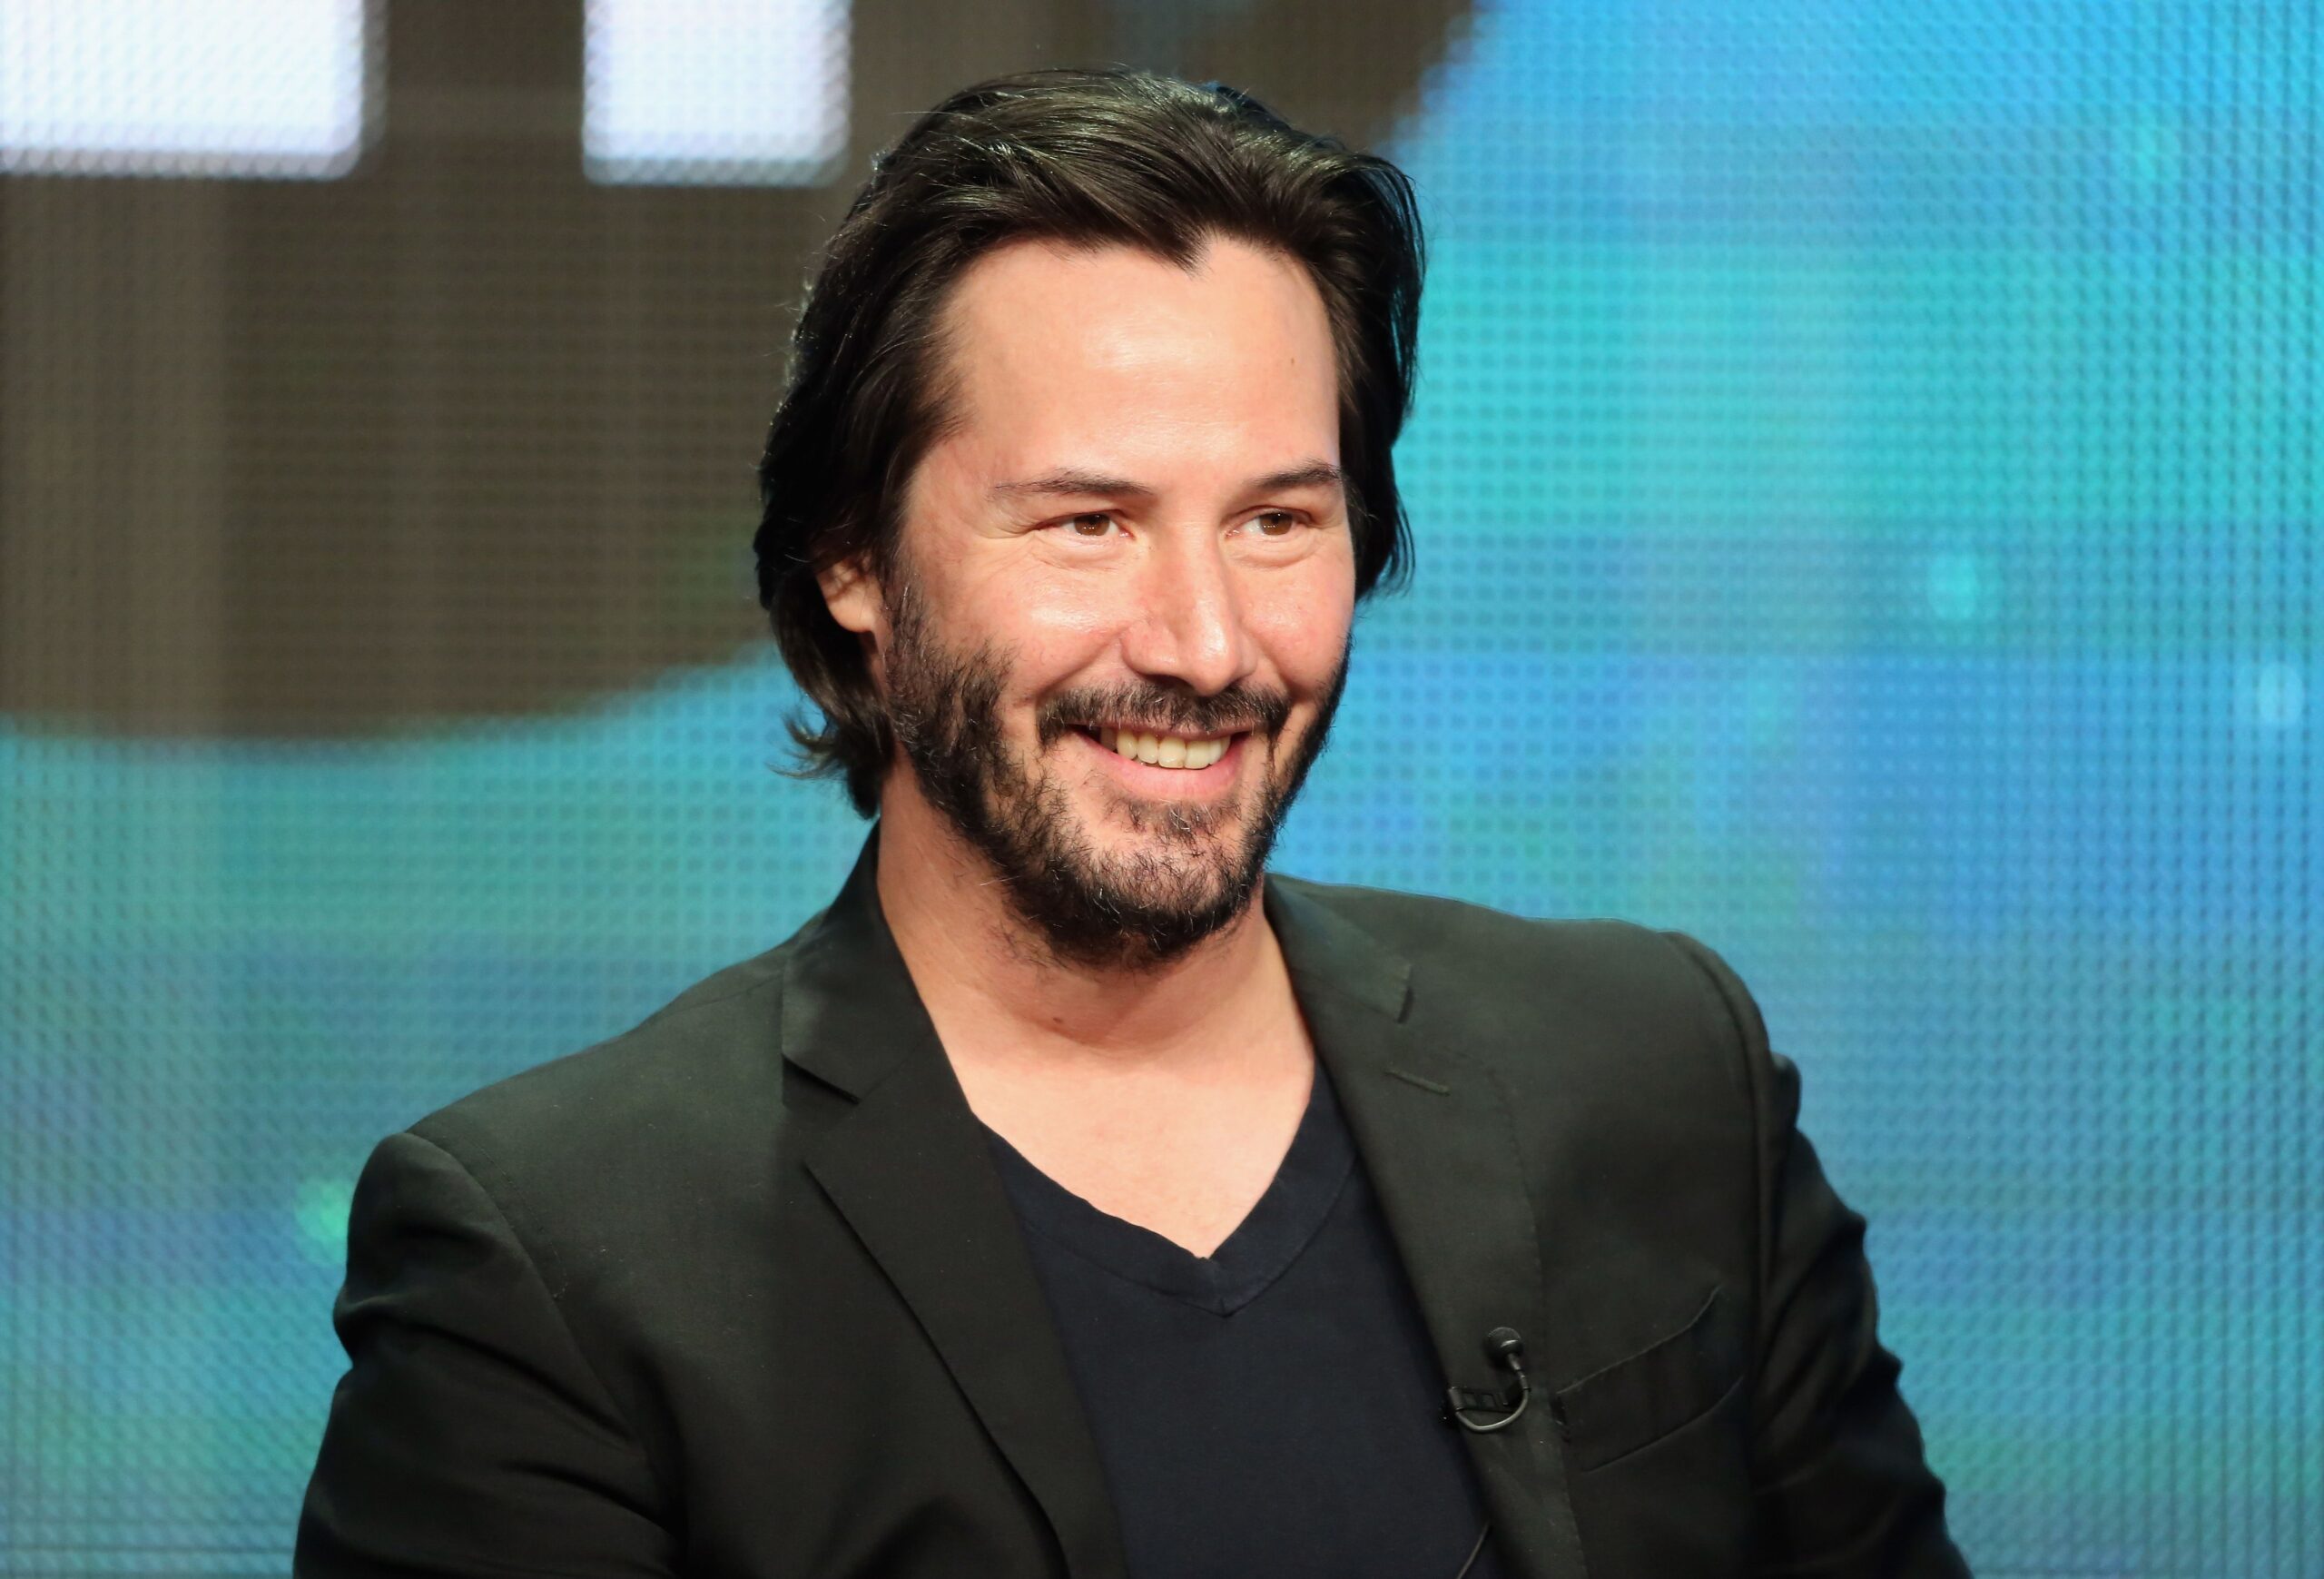 Keanu Reeves: A Humble Icon of Hollywood